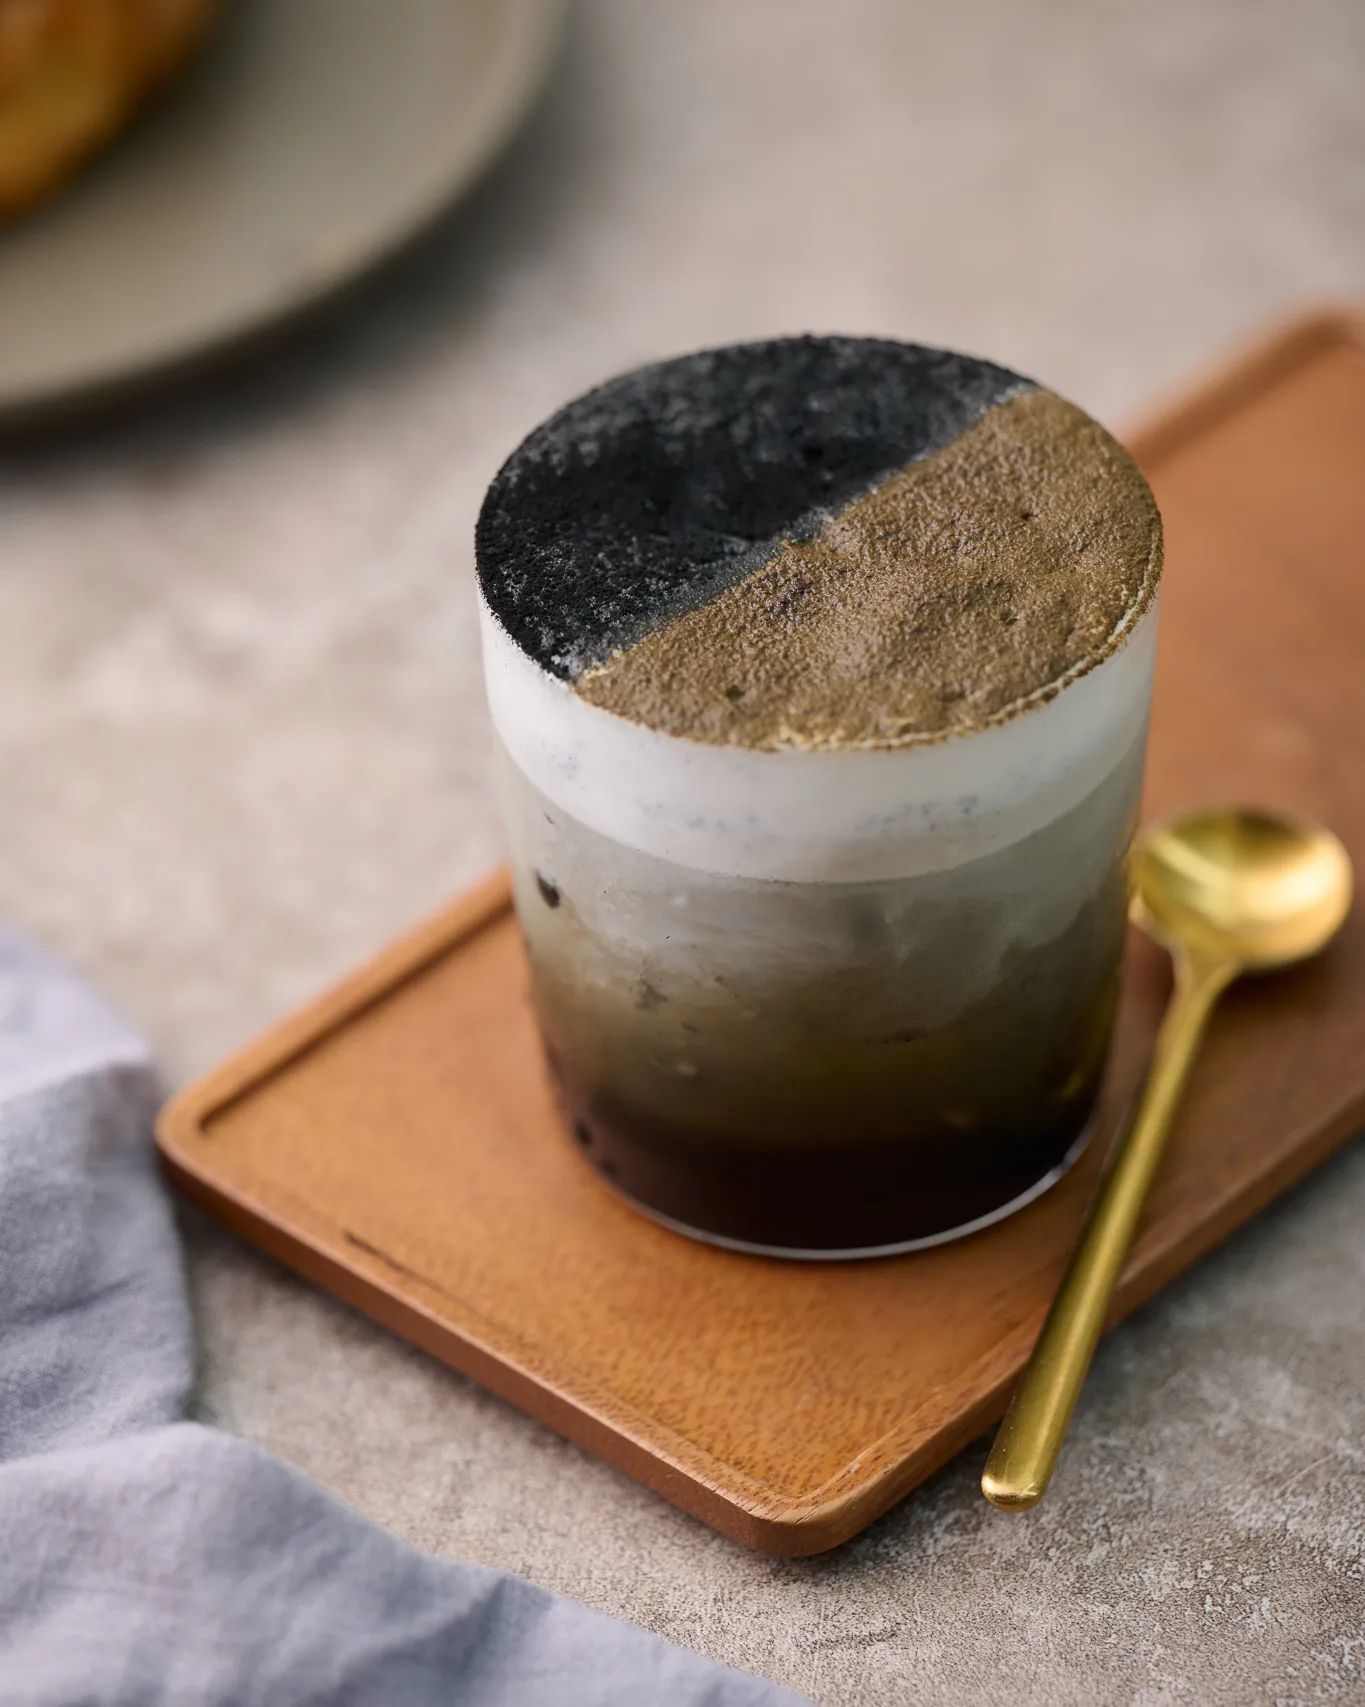 Drive away the Monday blues with the deliciously rich and creamy Hojicha Sesame Latte available at @domain.hk .

#findyourDOMAIN #EASTHongKong #EatatEAST #atEAST